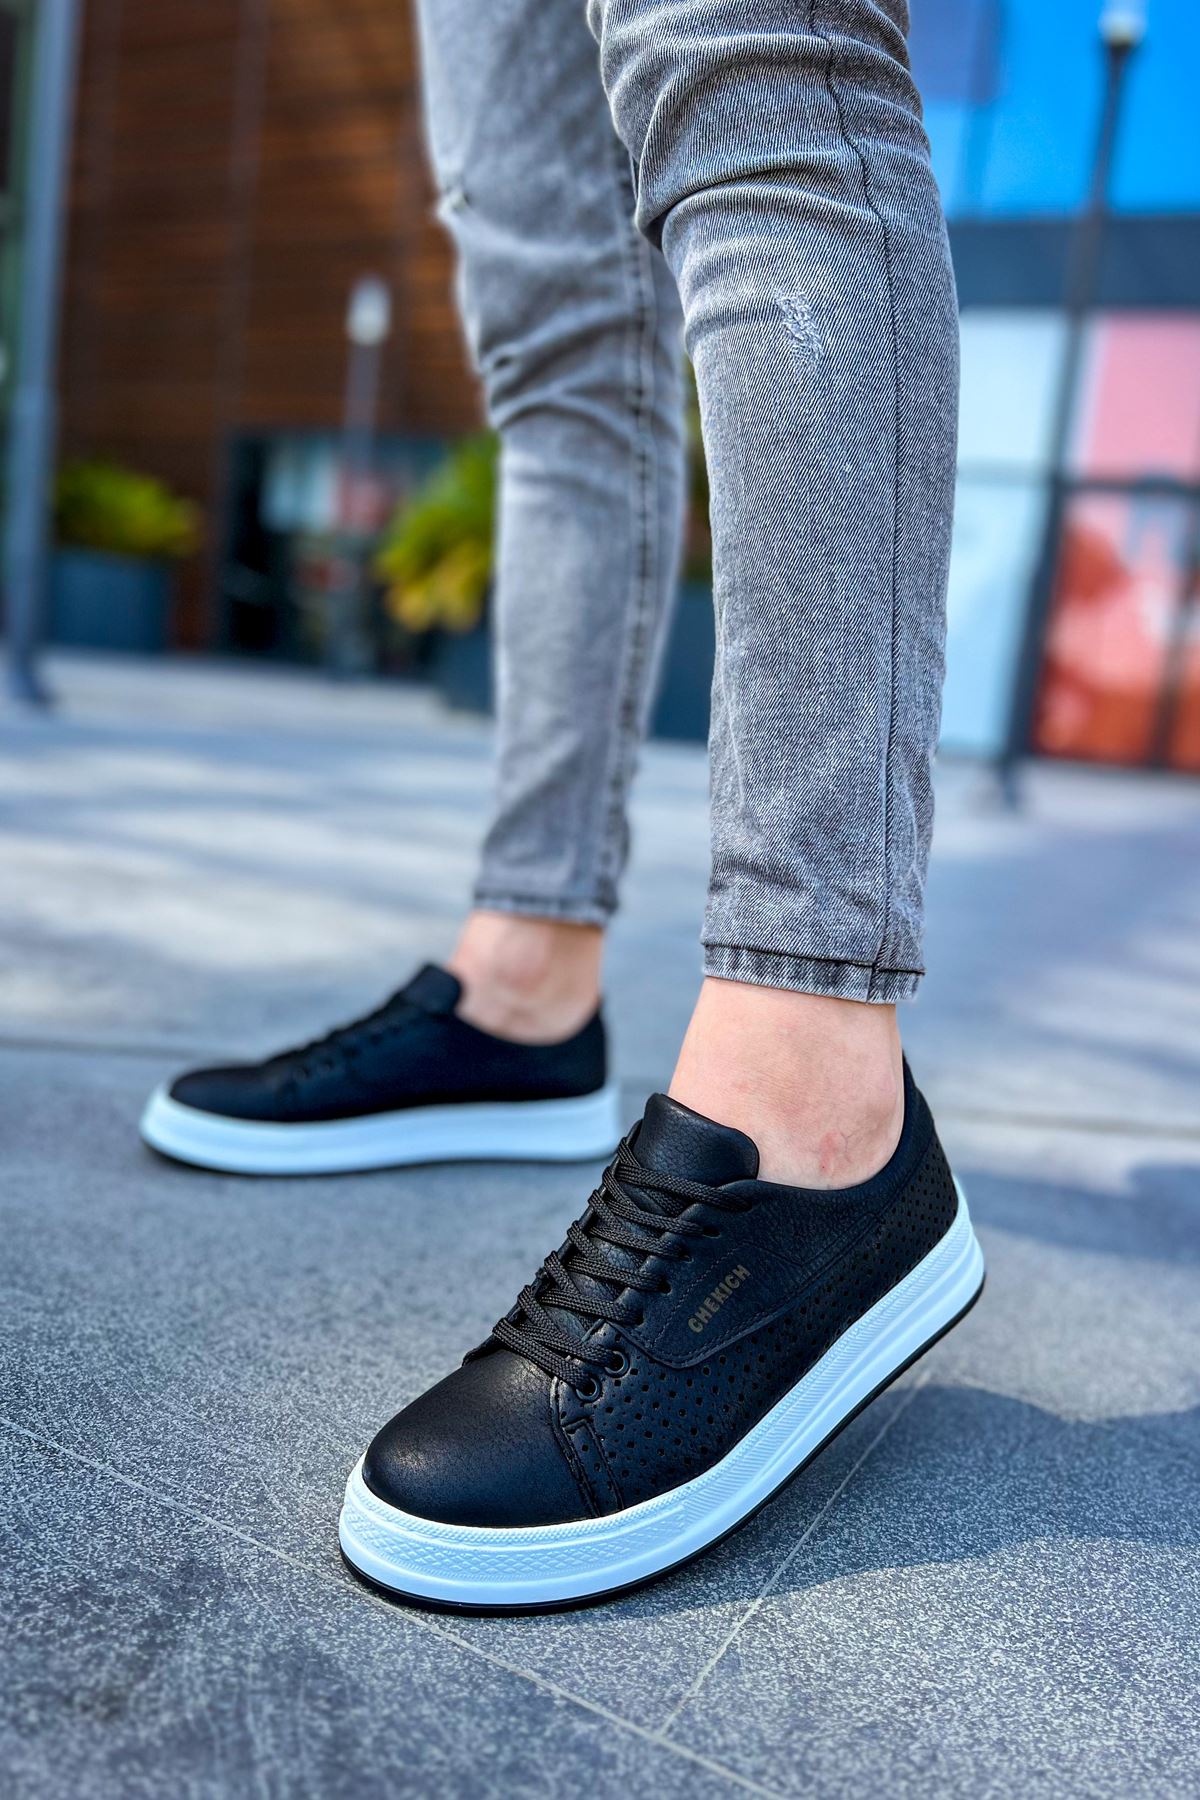 CH043 Men's Unisex Black-White Sole Casual Shoes - STREETMODE ™